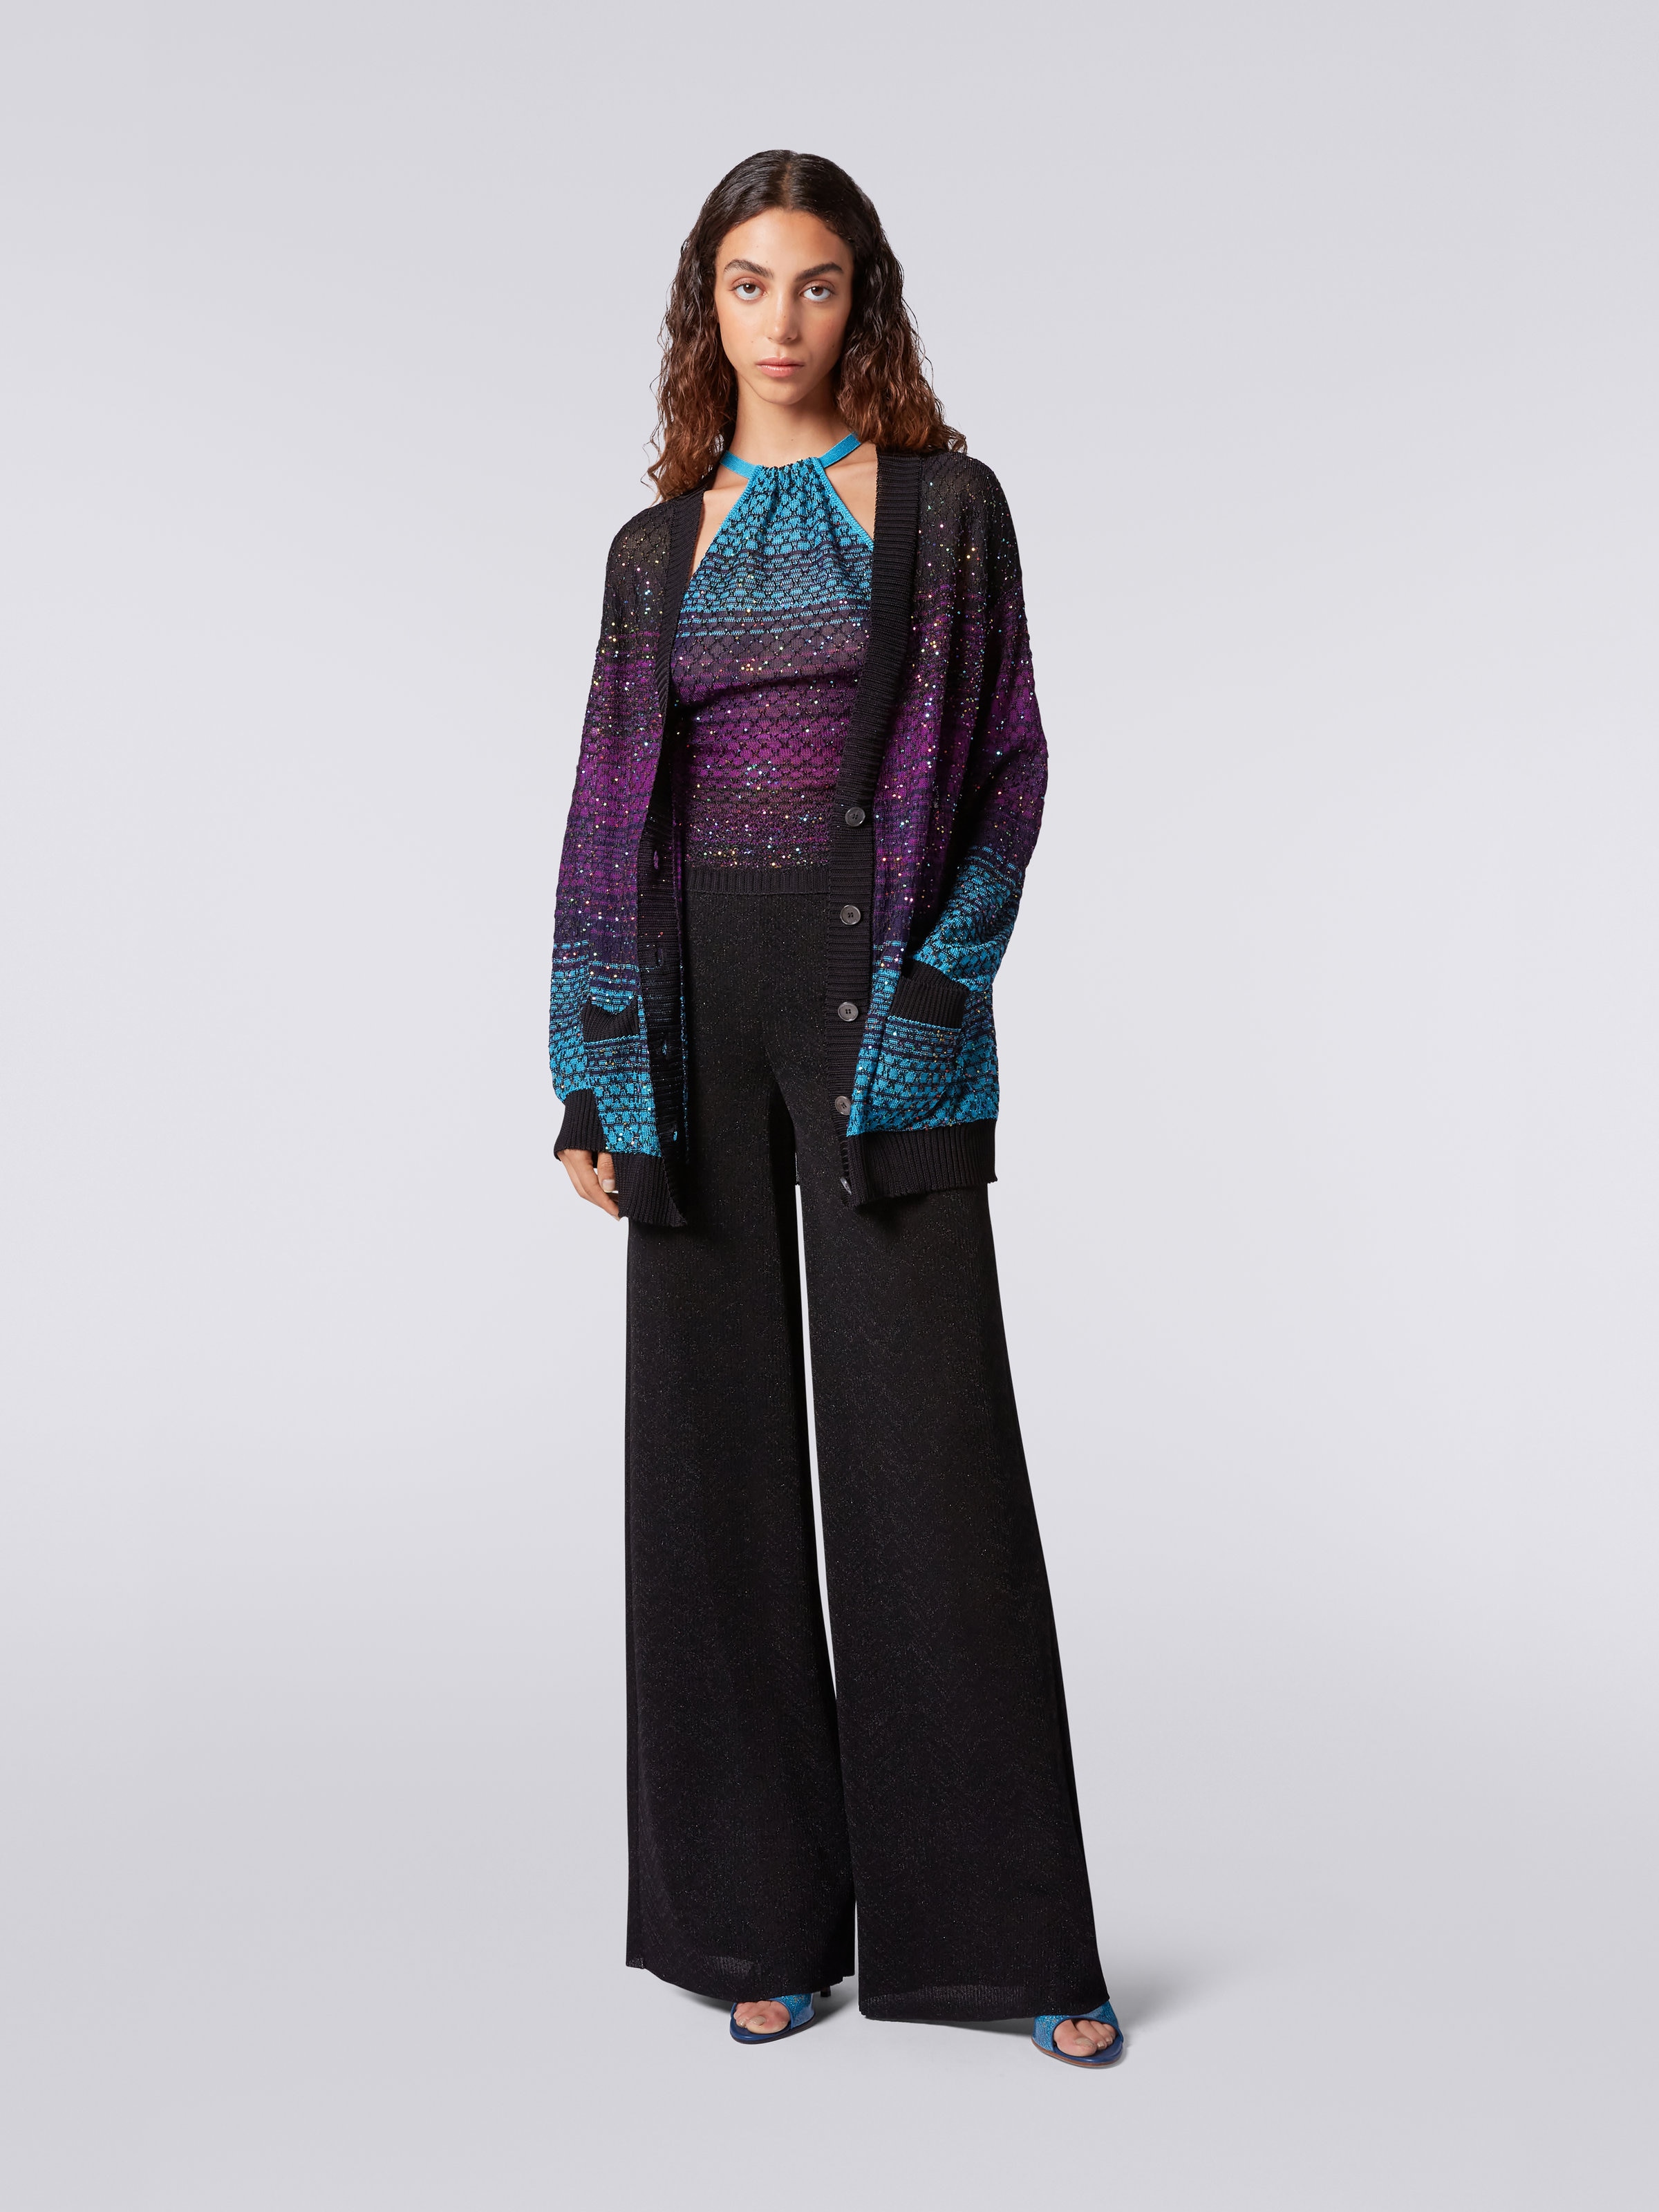 Oversized loose-knit cardigan with sequins, Turquoise, Purple & Black - 1